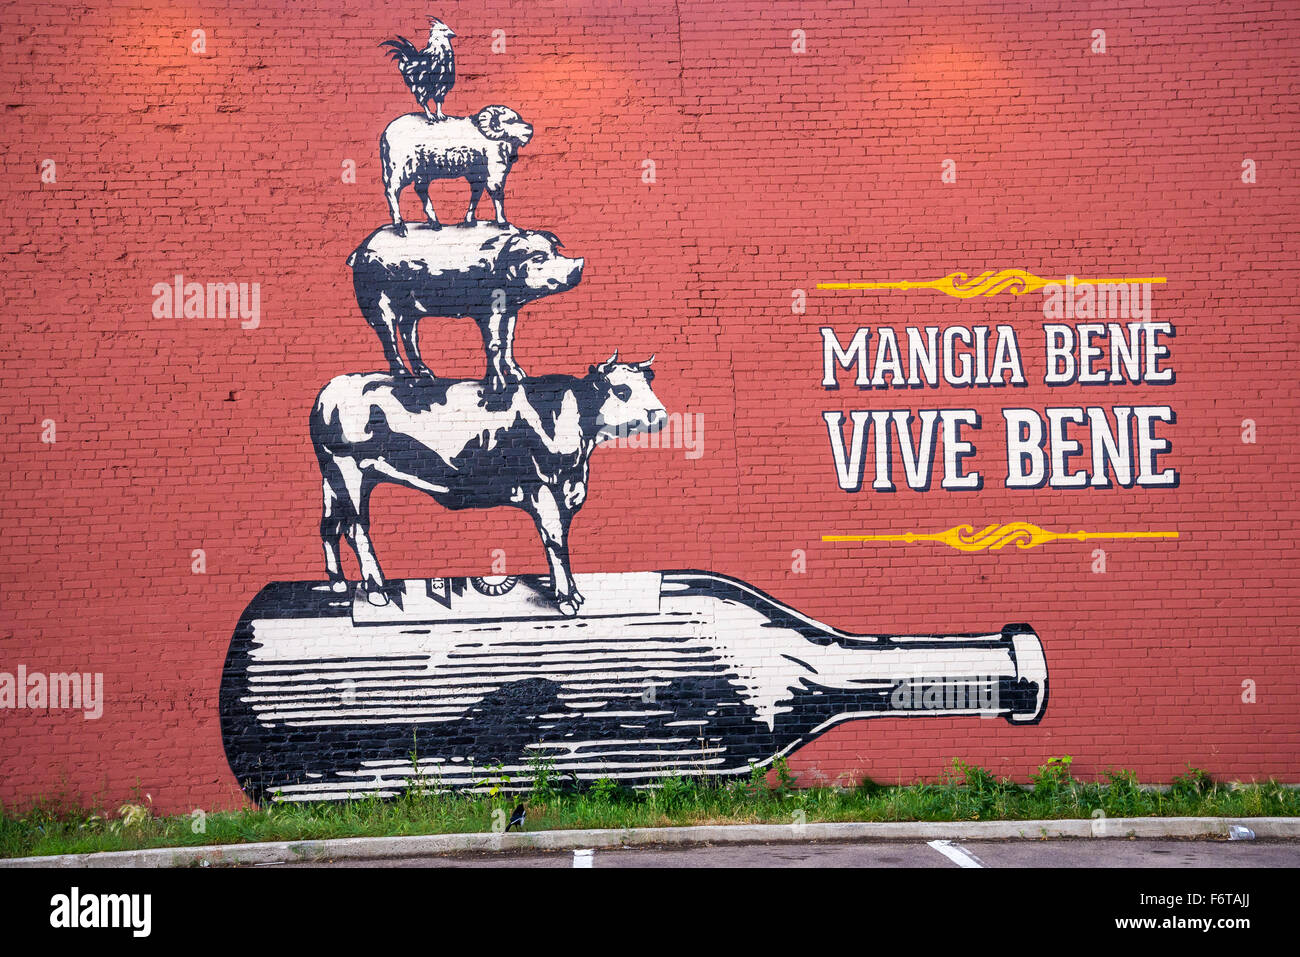 Mangia bene, vive bene. Eat well. live well sign painted on brick wall Stock Photo